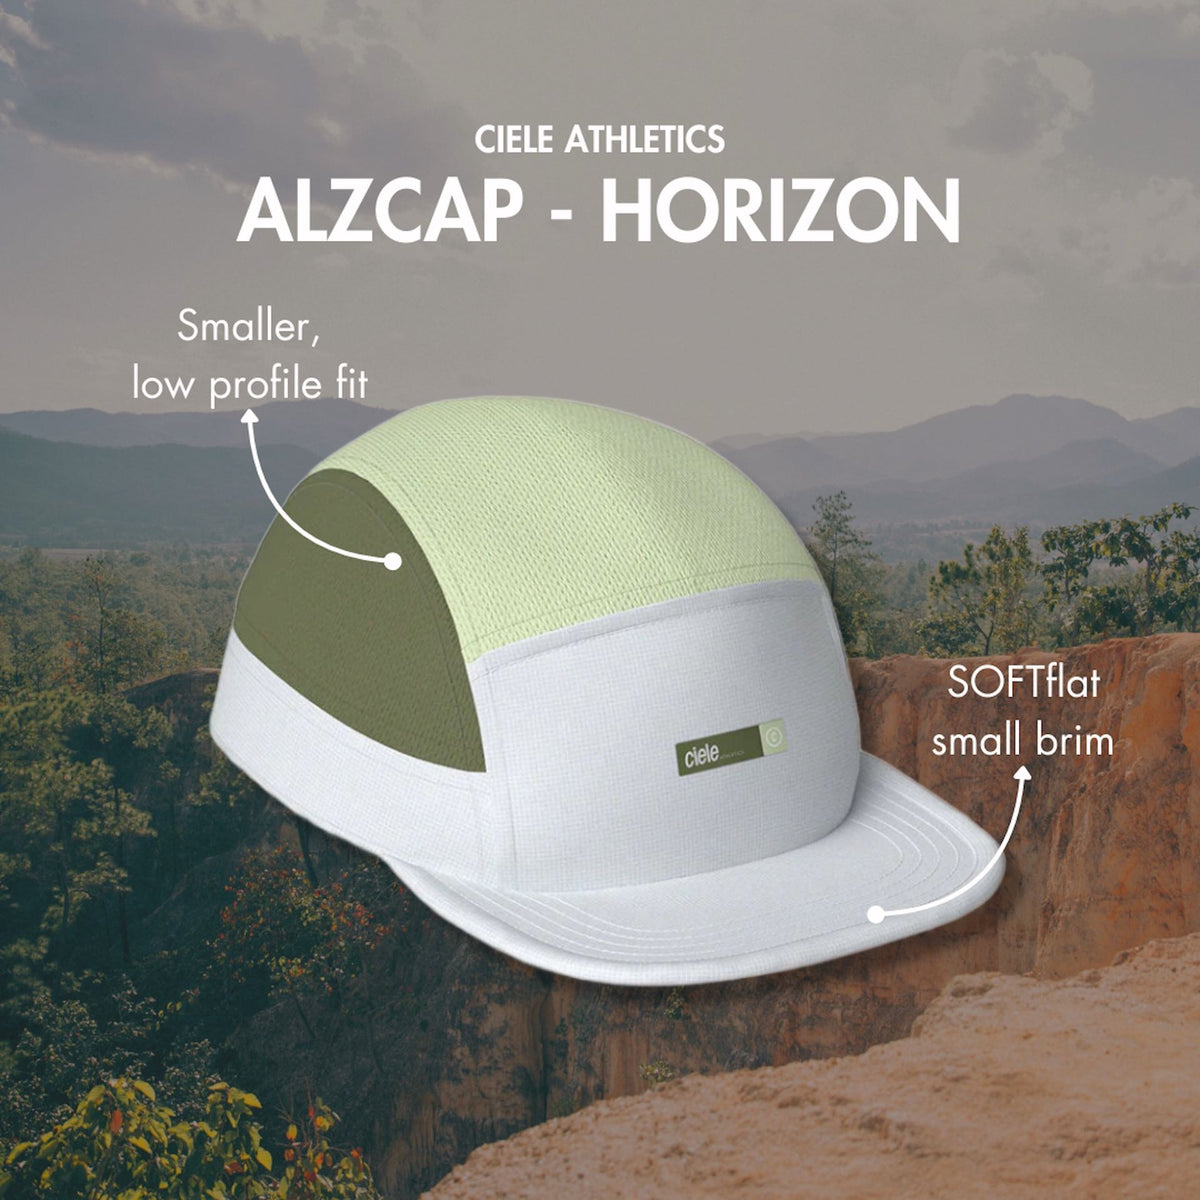 Ciele Athletics' ALZCap - Horizon has a smaller, low profile fit and SOFTflat small brim.